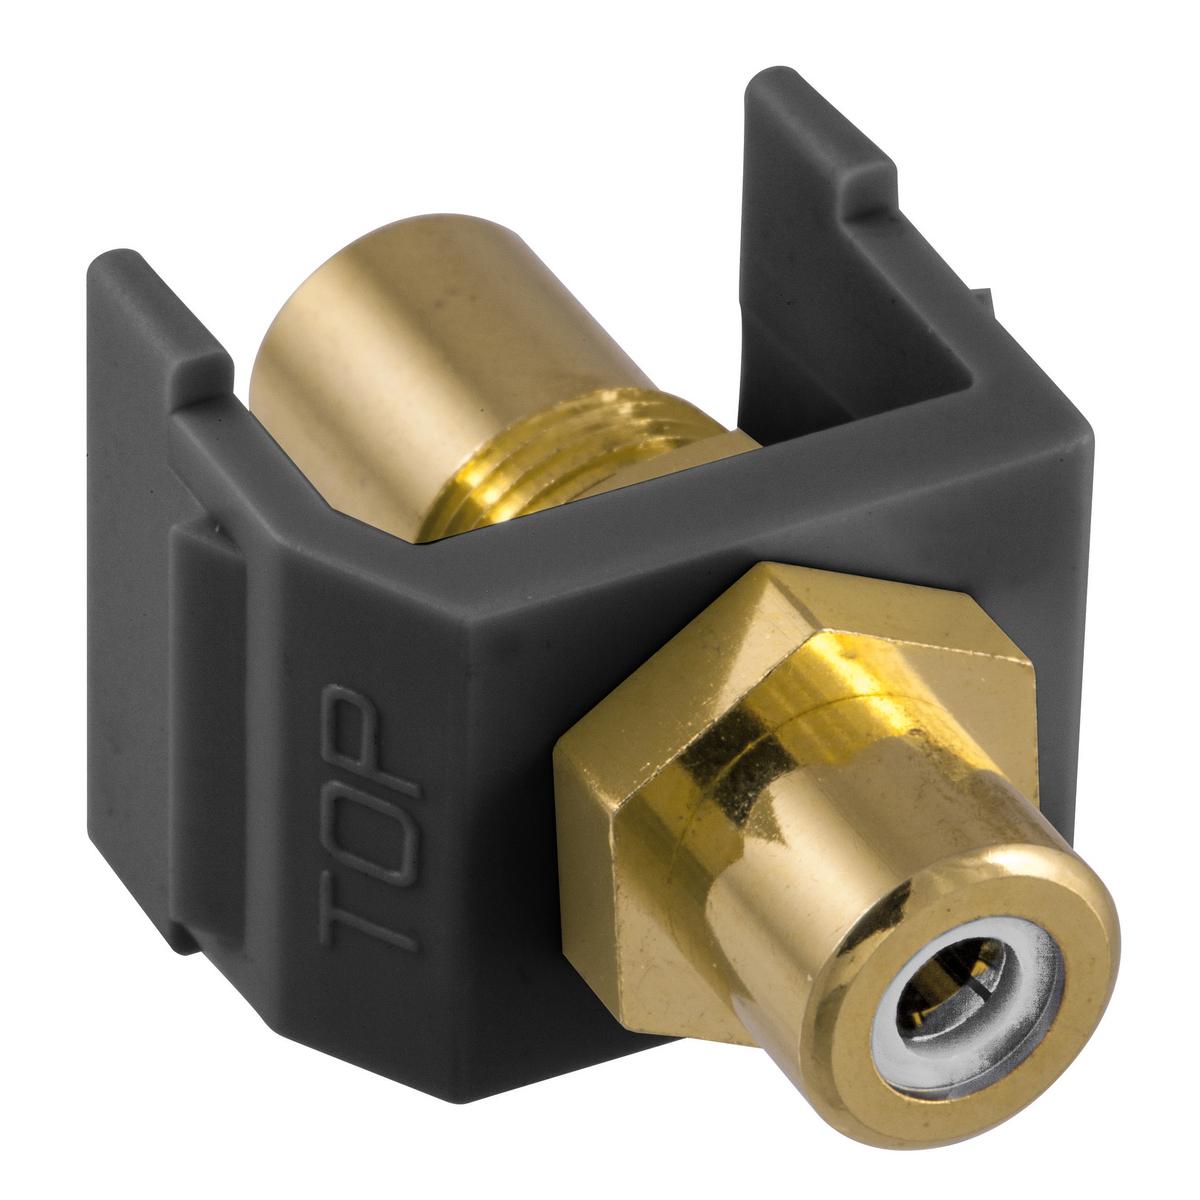 Hubbell SFRCWFFBK RCA Connector, Female to Female, White Insulator, Black Housing  ; High quality Gold plating ; Seamless Hubbell system integration ; Deliver composite, component or digital signals ; Standard Product